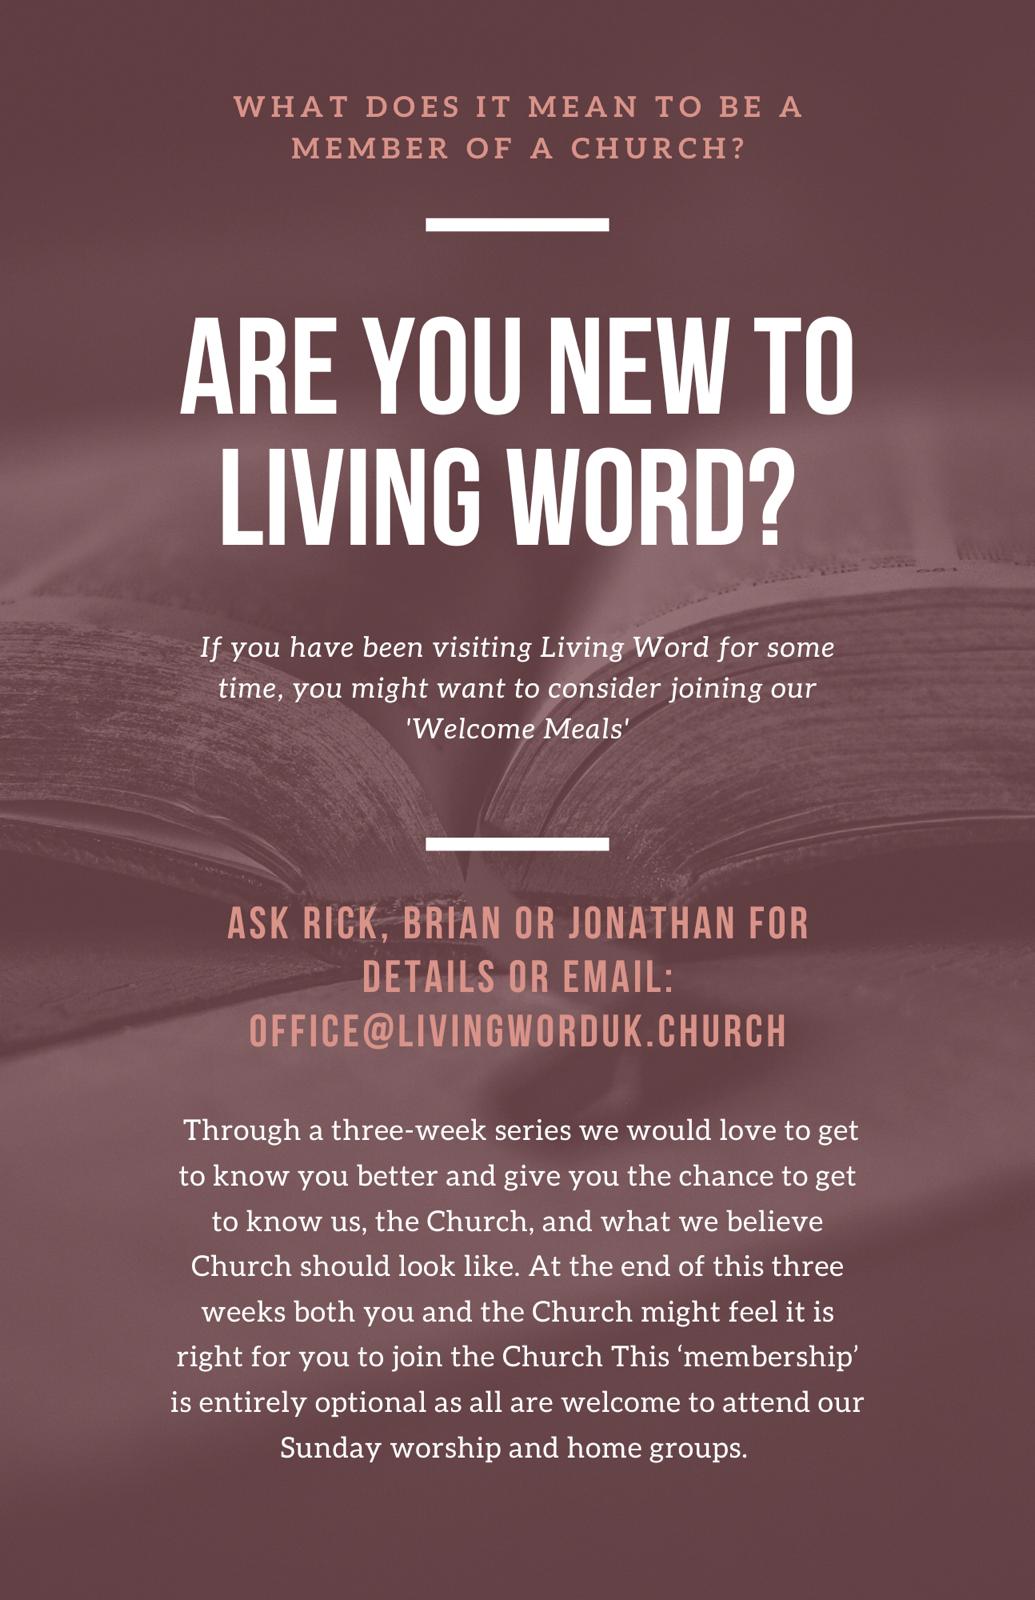 Are you new to living word